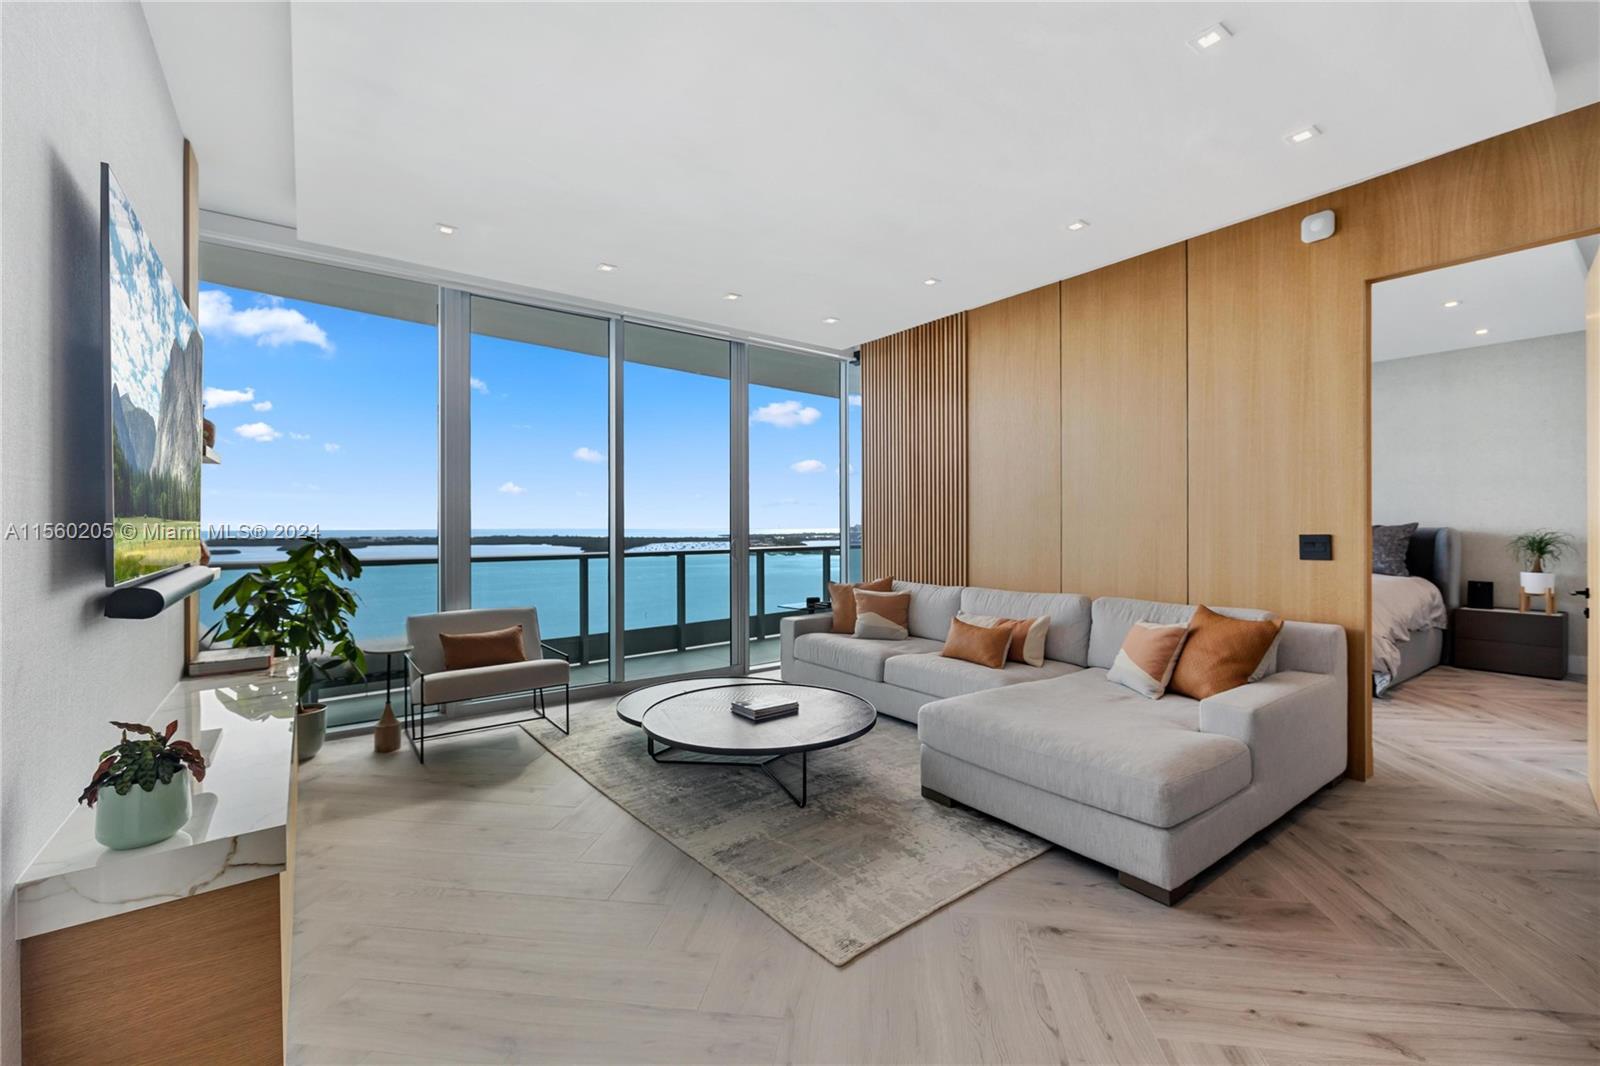 Available NOW for 6 months or Annual rental. Immerse yourself in luxury at Jade Brickell's waterfront gem! This FULLY FURNISHED, fully renovated 2 BD, 3 BA unit on the 29th floor offers breathtaking bay views. Features include a custom office, white oak floors, walk-in closets, and high-end furnishings from Restoration Hardware, Addison House, + more. In-unit washer/dryer, automatic window treatments, valet parking, and internet included. Primary bedroom with king bed, guest room has queen bed. This luxury building has a full size updated gym, spa, and pilates rooms. Walk to LPM, bars, and shopping. The best corridor of Brickell to live in. Prefer no Pets, but will take into consideration.